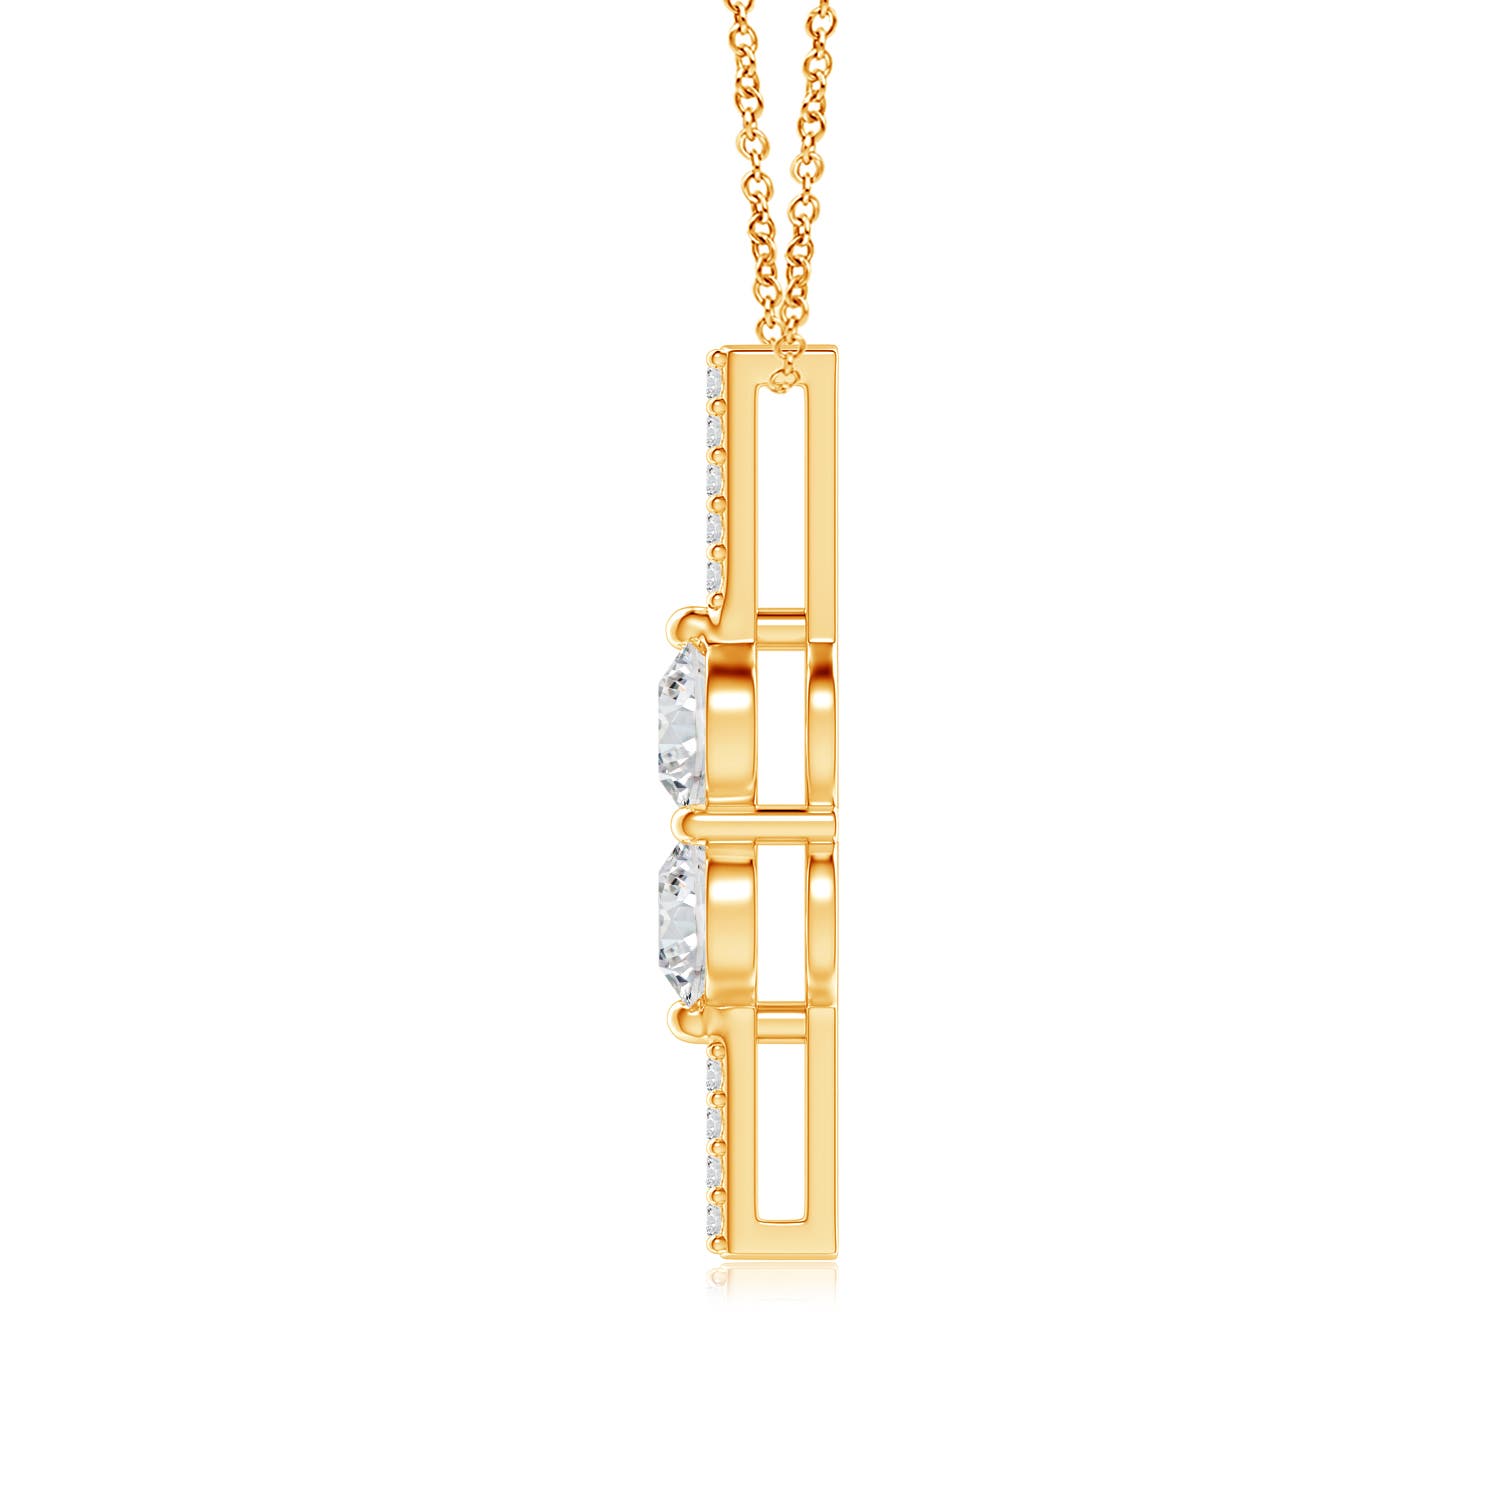 H, SI2 / 0.76 CT / 14 KT Yellow Gold